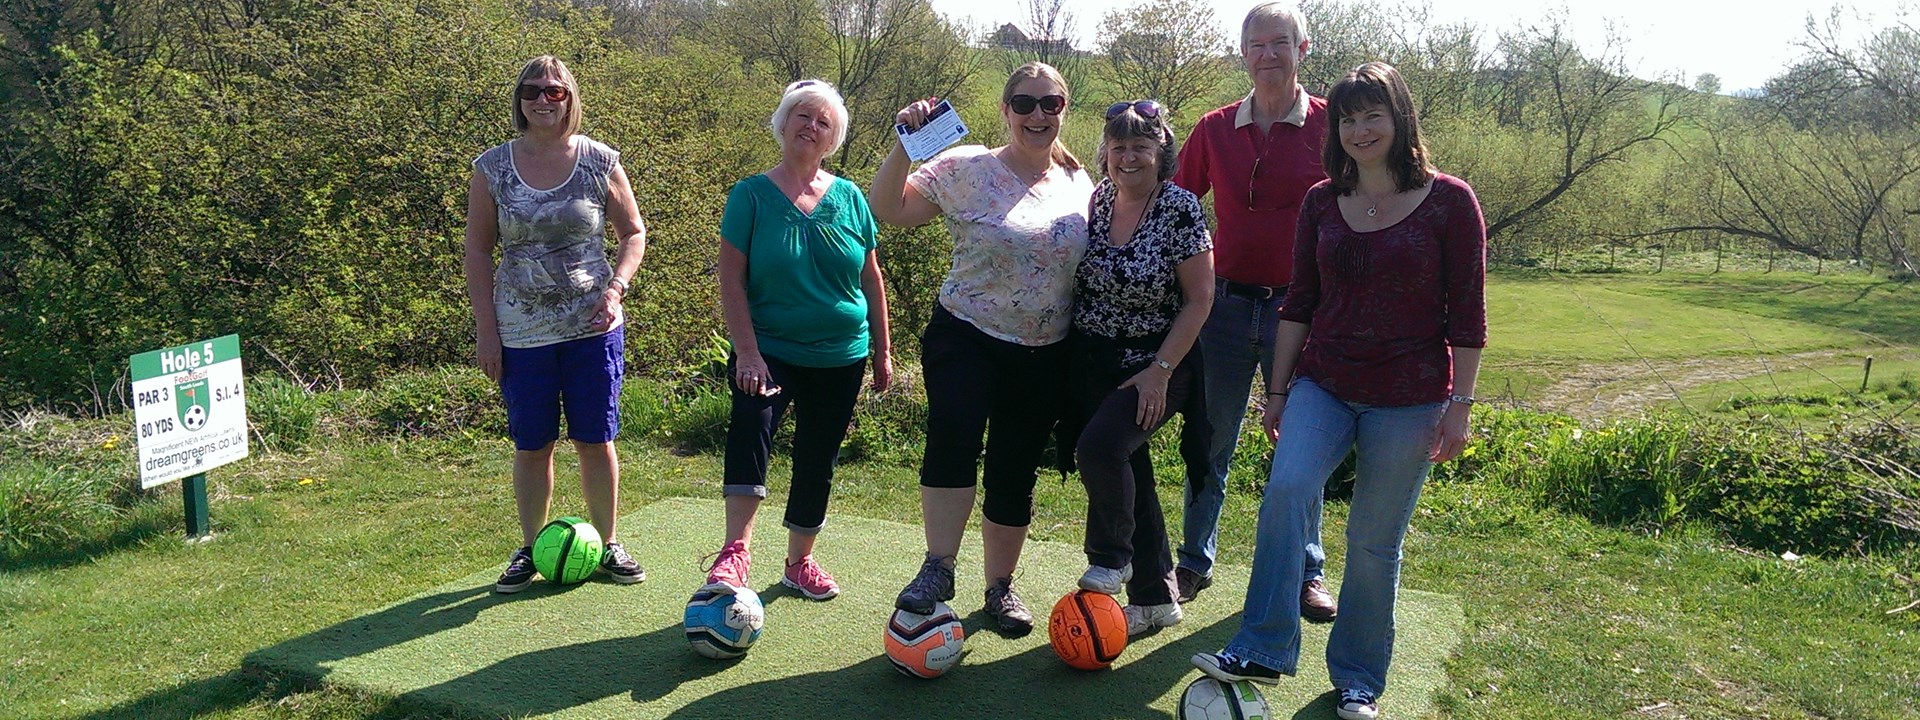 Footgolf group